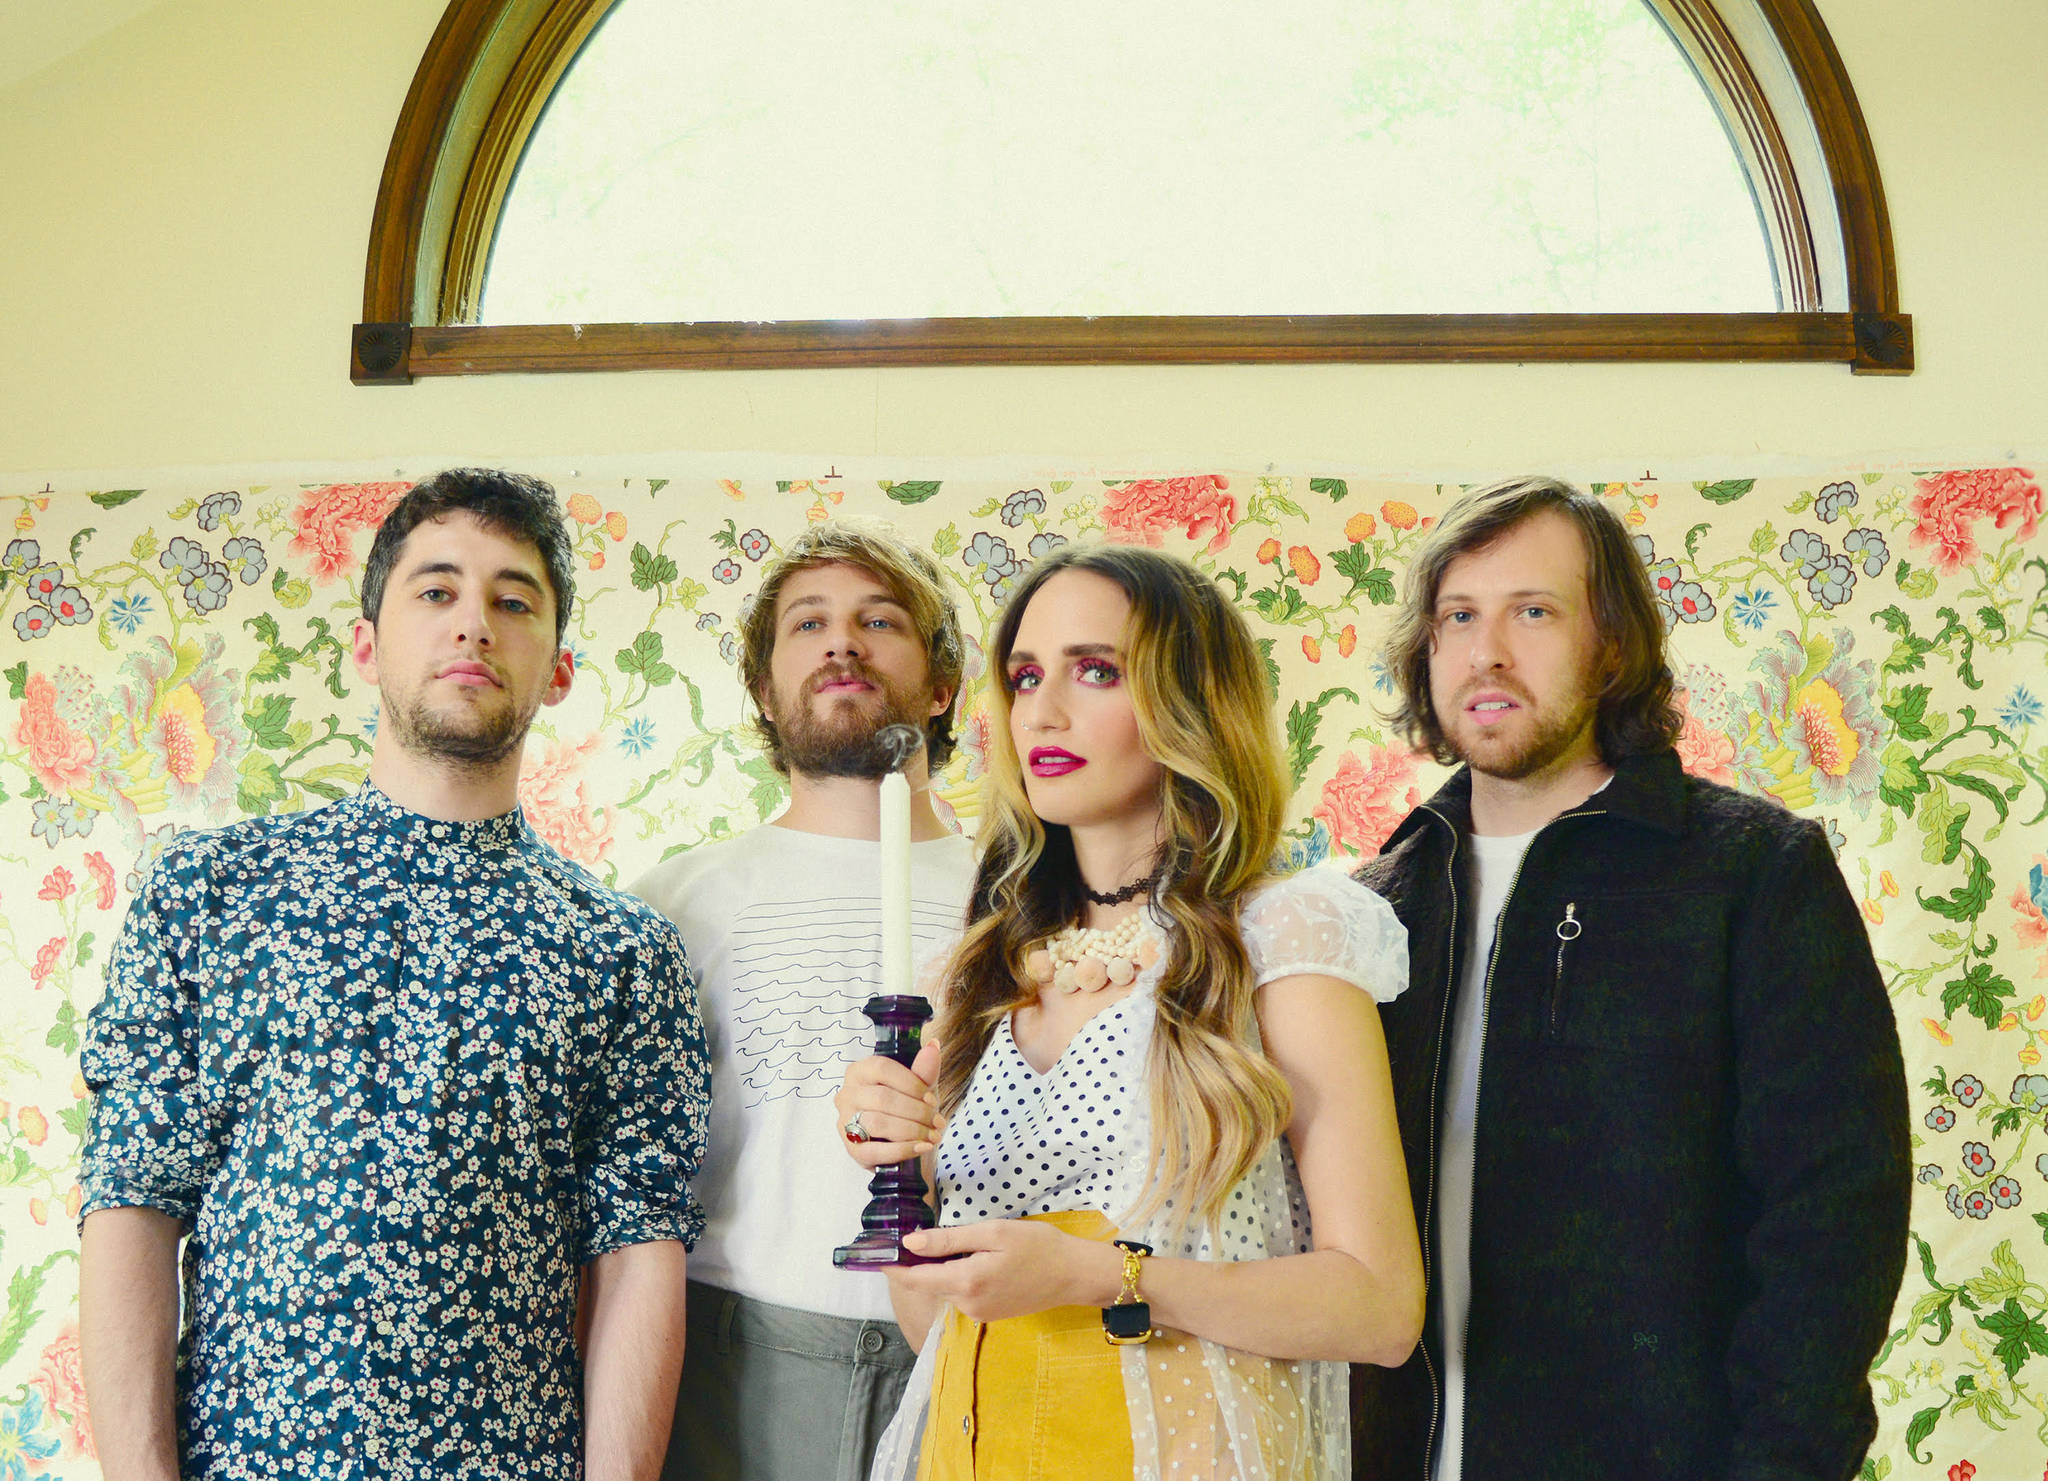 Speedy Ortiz with the candlestick in the flowery room. Photo courtesy Ground Control Touring